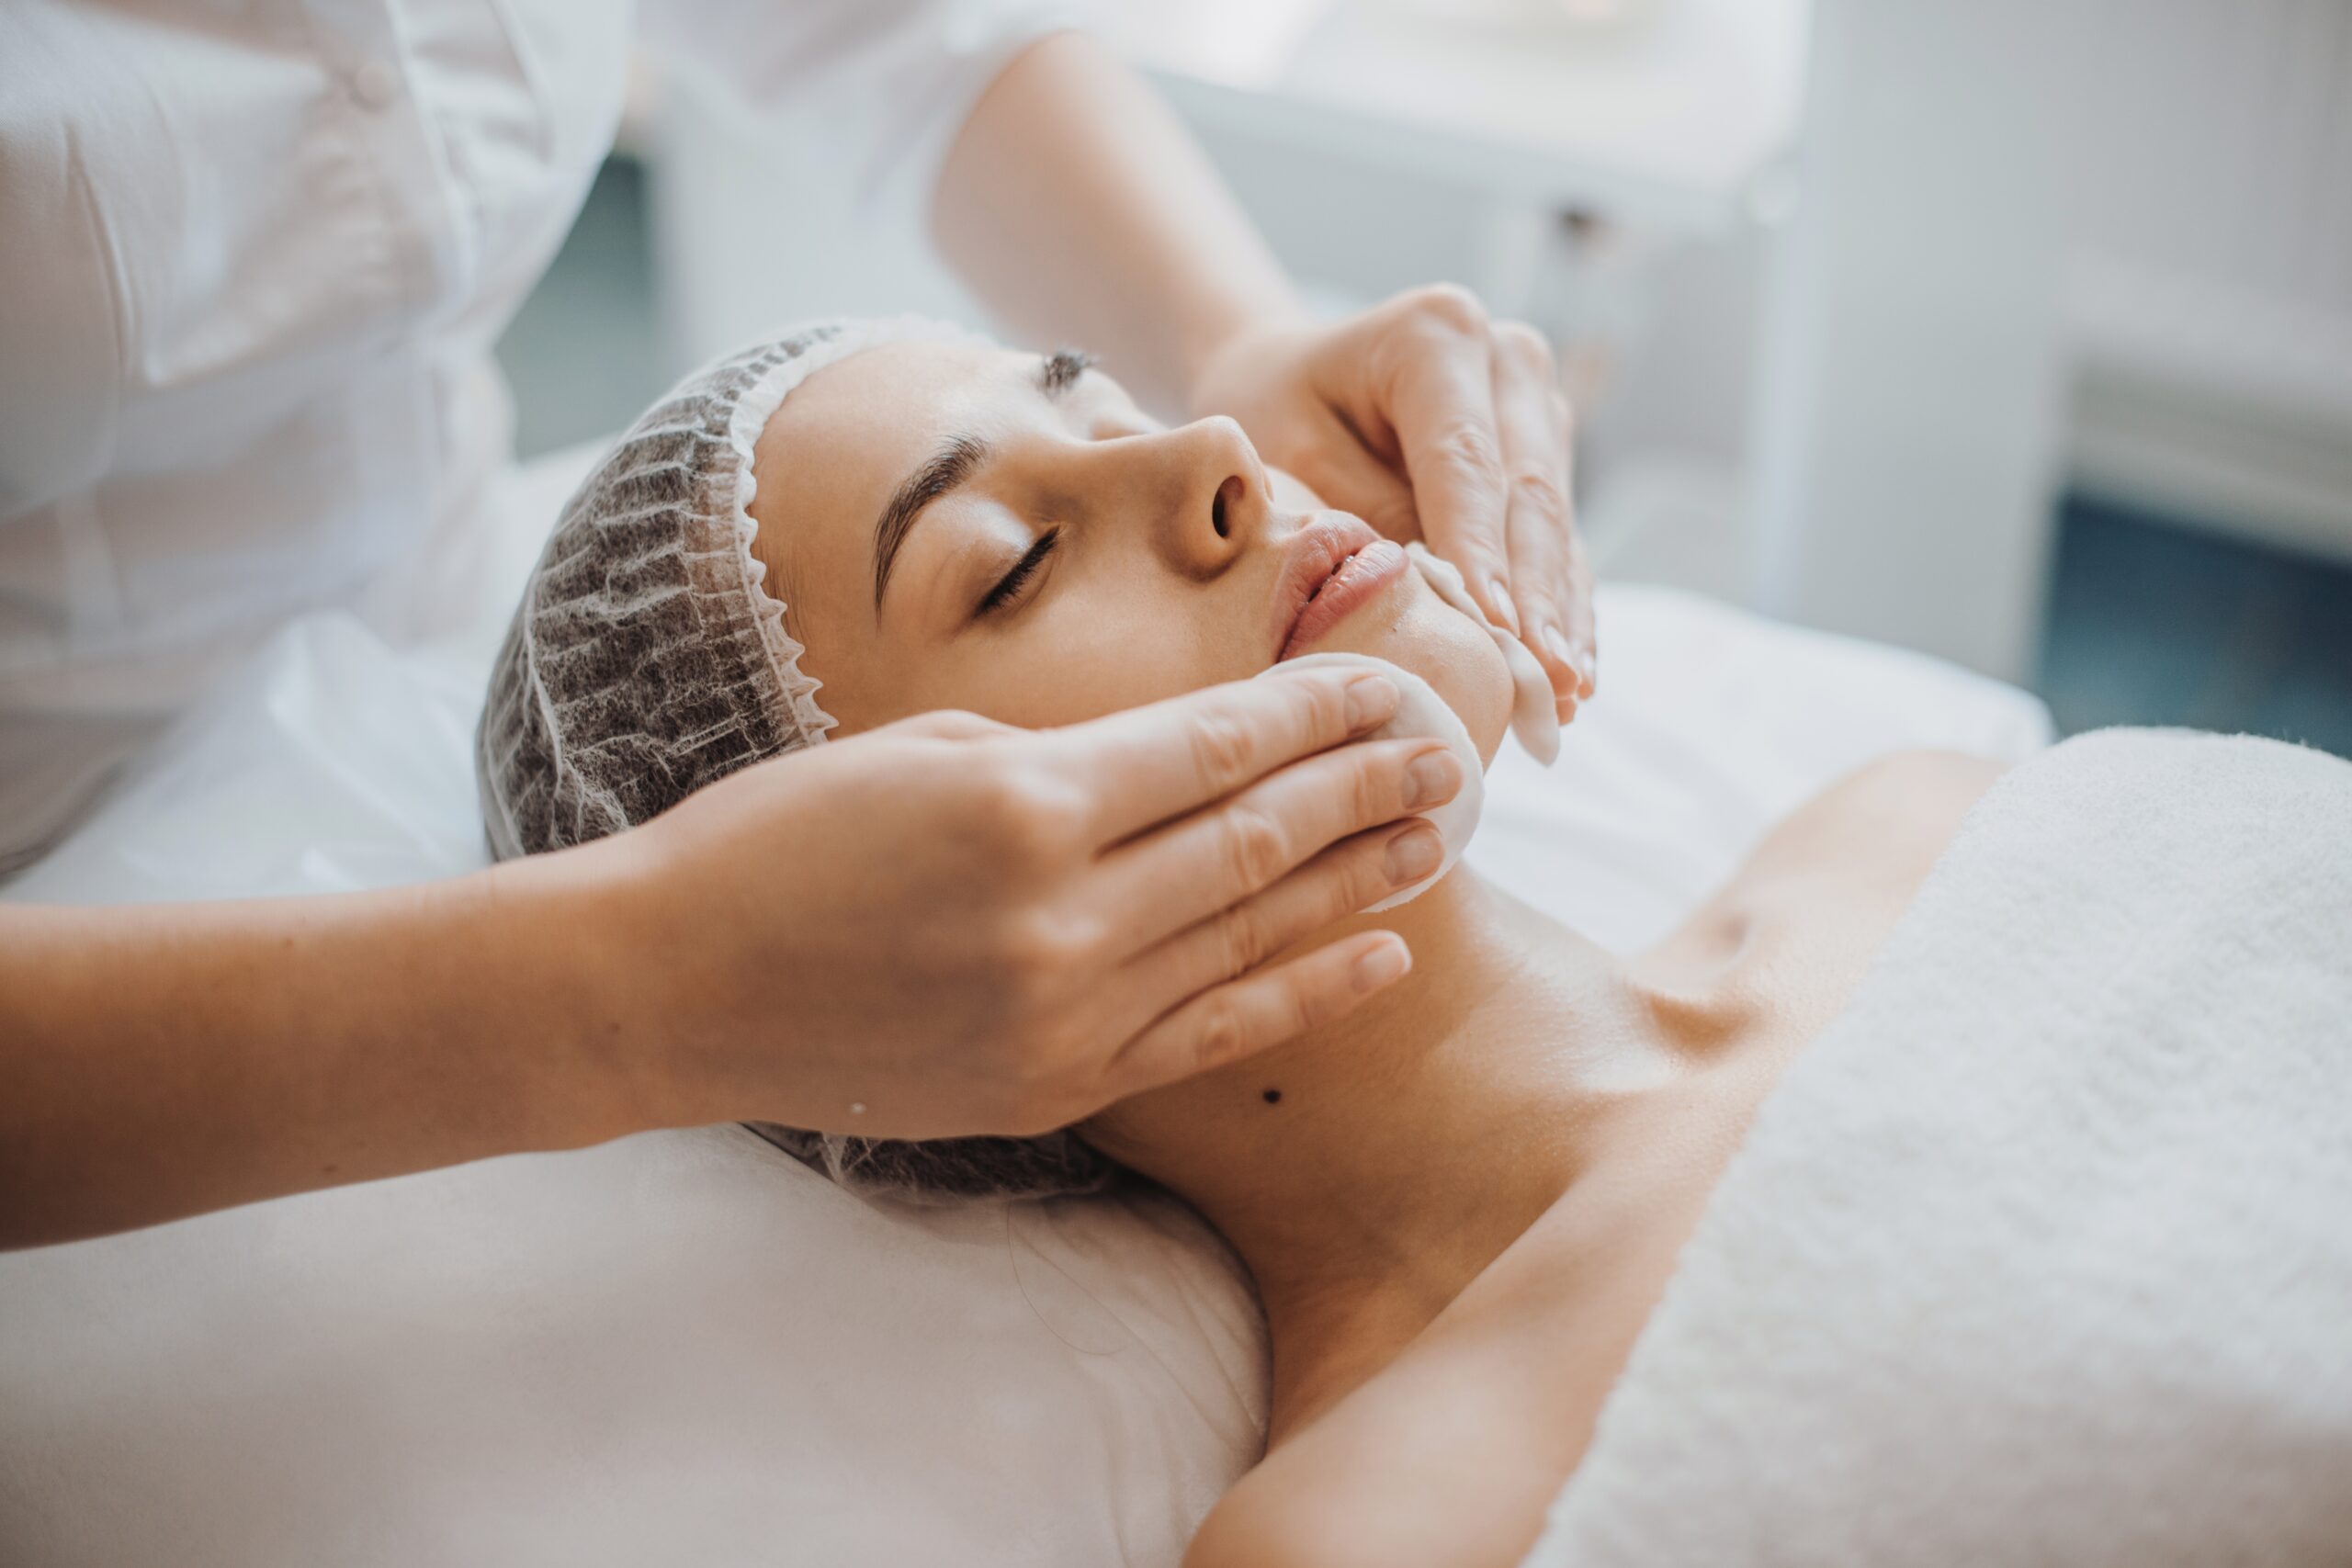 Everything You Should Know Before Getting an IPL Photofacial